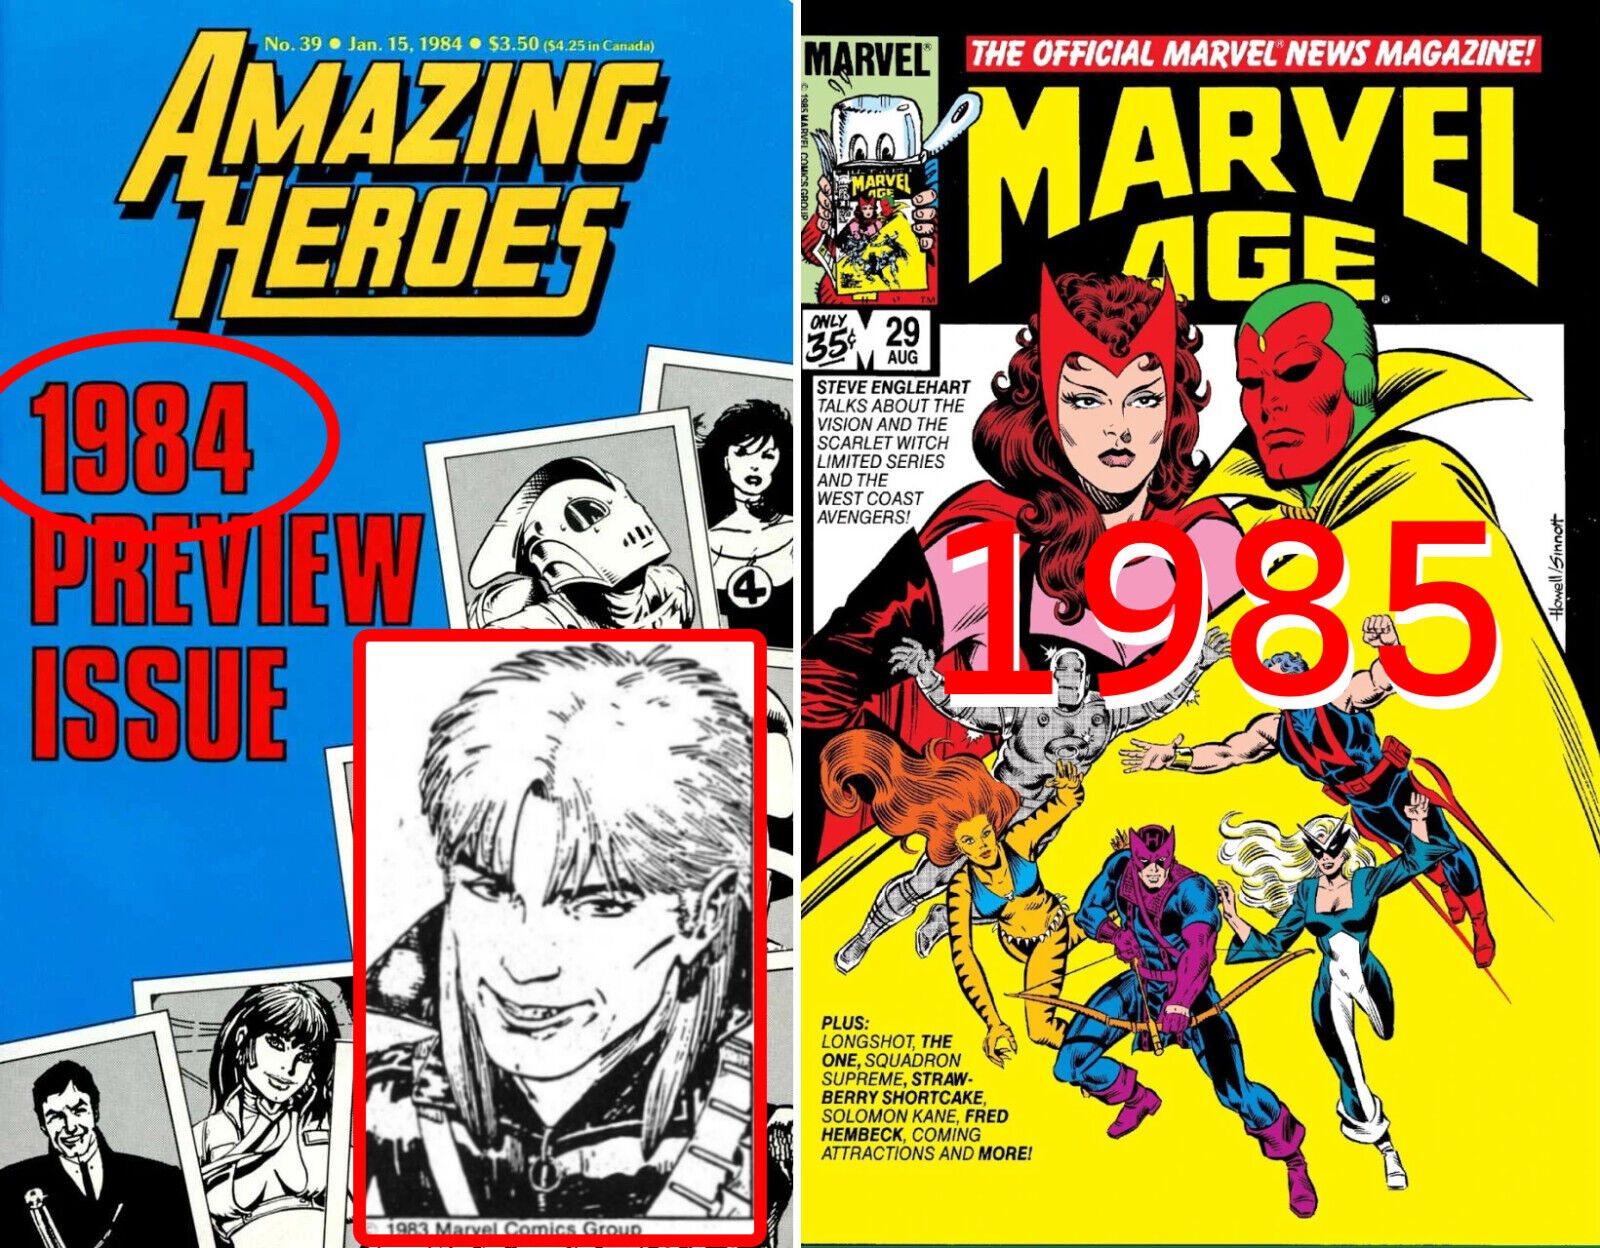 Amazing Heroes #39 1st Preview Longshot 1.5 YEARS before #1 OR Marvel Age 29